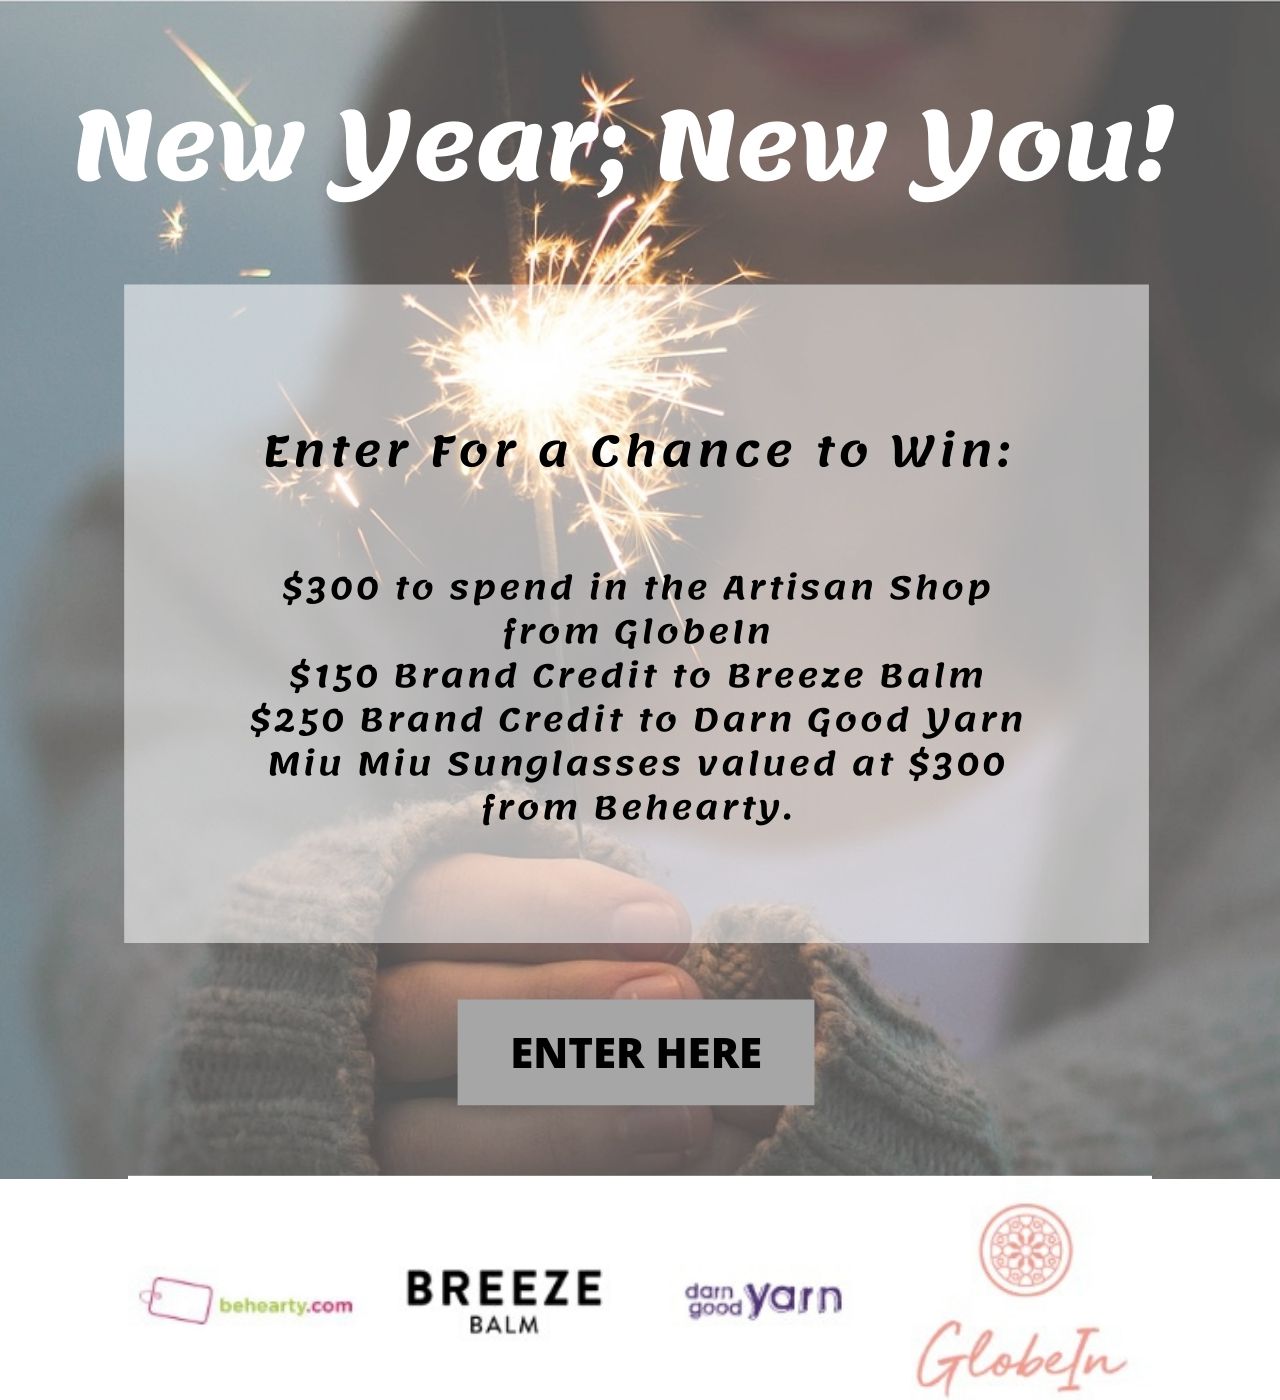 New Year; New You! Enter for a chance to win: $300 to spend in the Artisan Shop from Globein. $150 Brand Credit to breeze Balm. $250 Brand Credit to Darn Good Yarn. Miu Miu Sunglasses valued at $300 from Behearty. Enter Here.